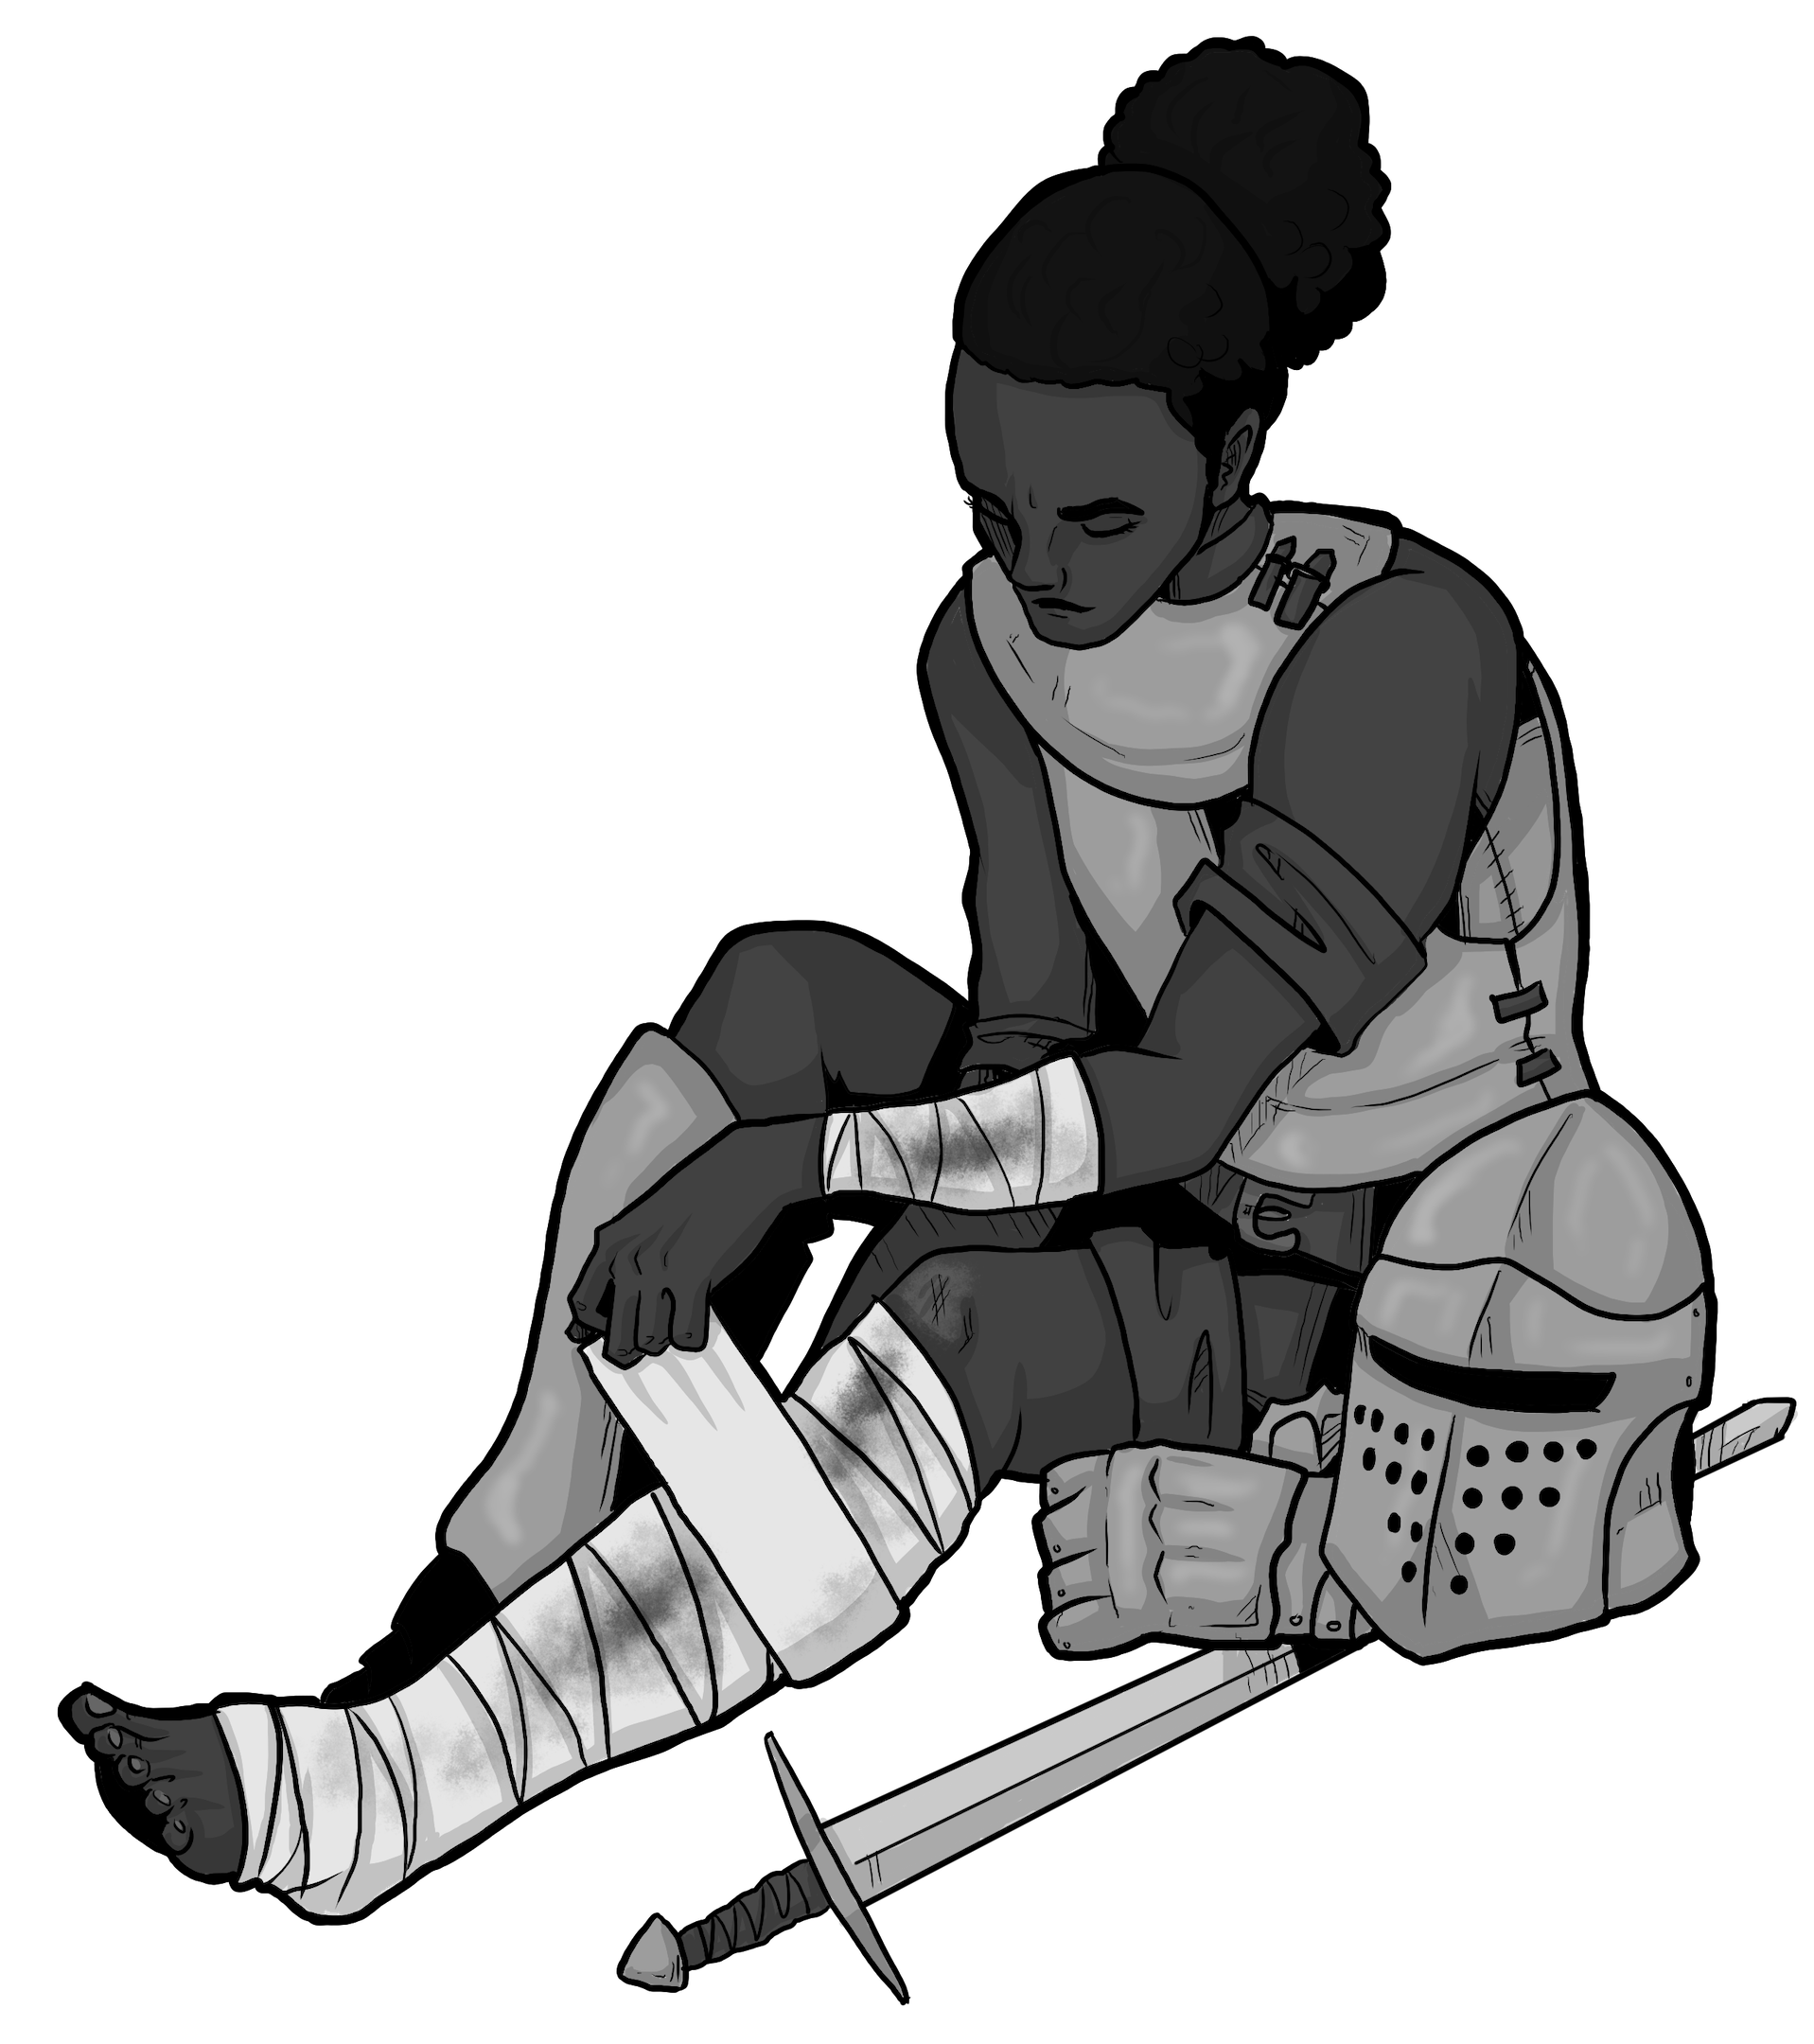 A black woman in armour, fixing the bandage on her wounded leg. Her helmet, gauntlets, and sword lie on the ground beside her.